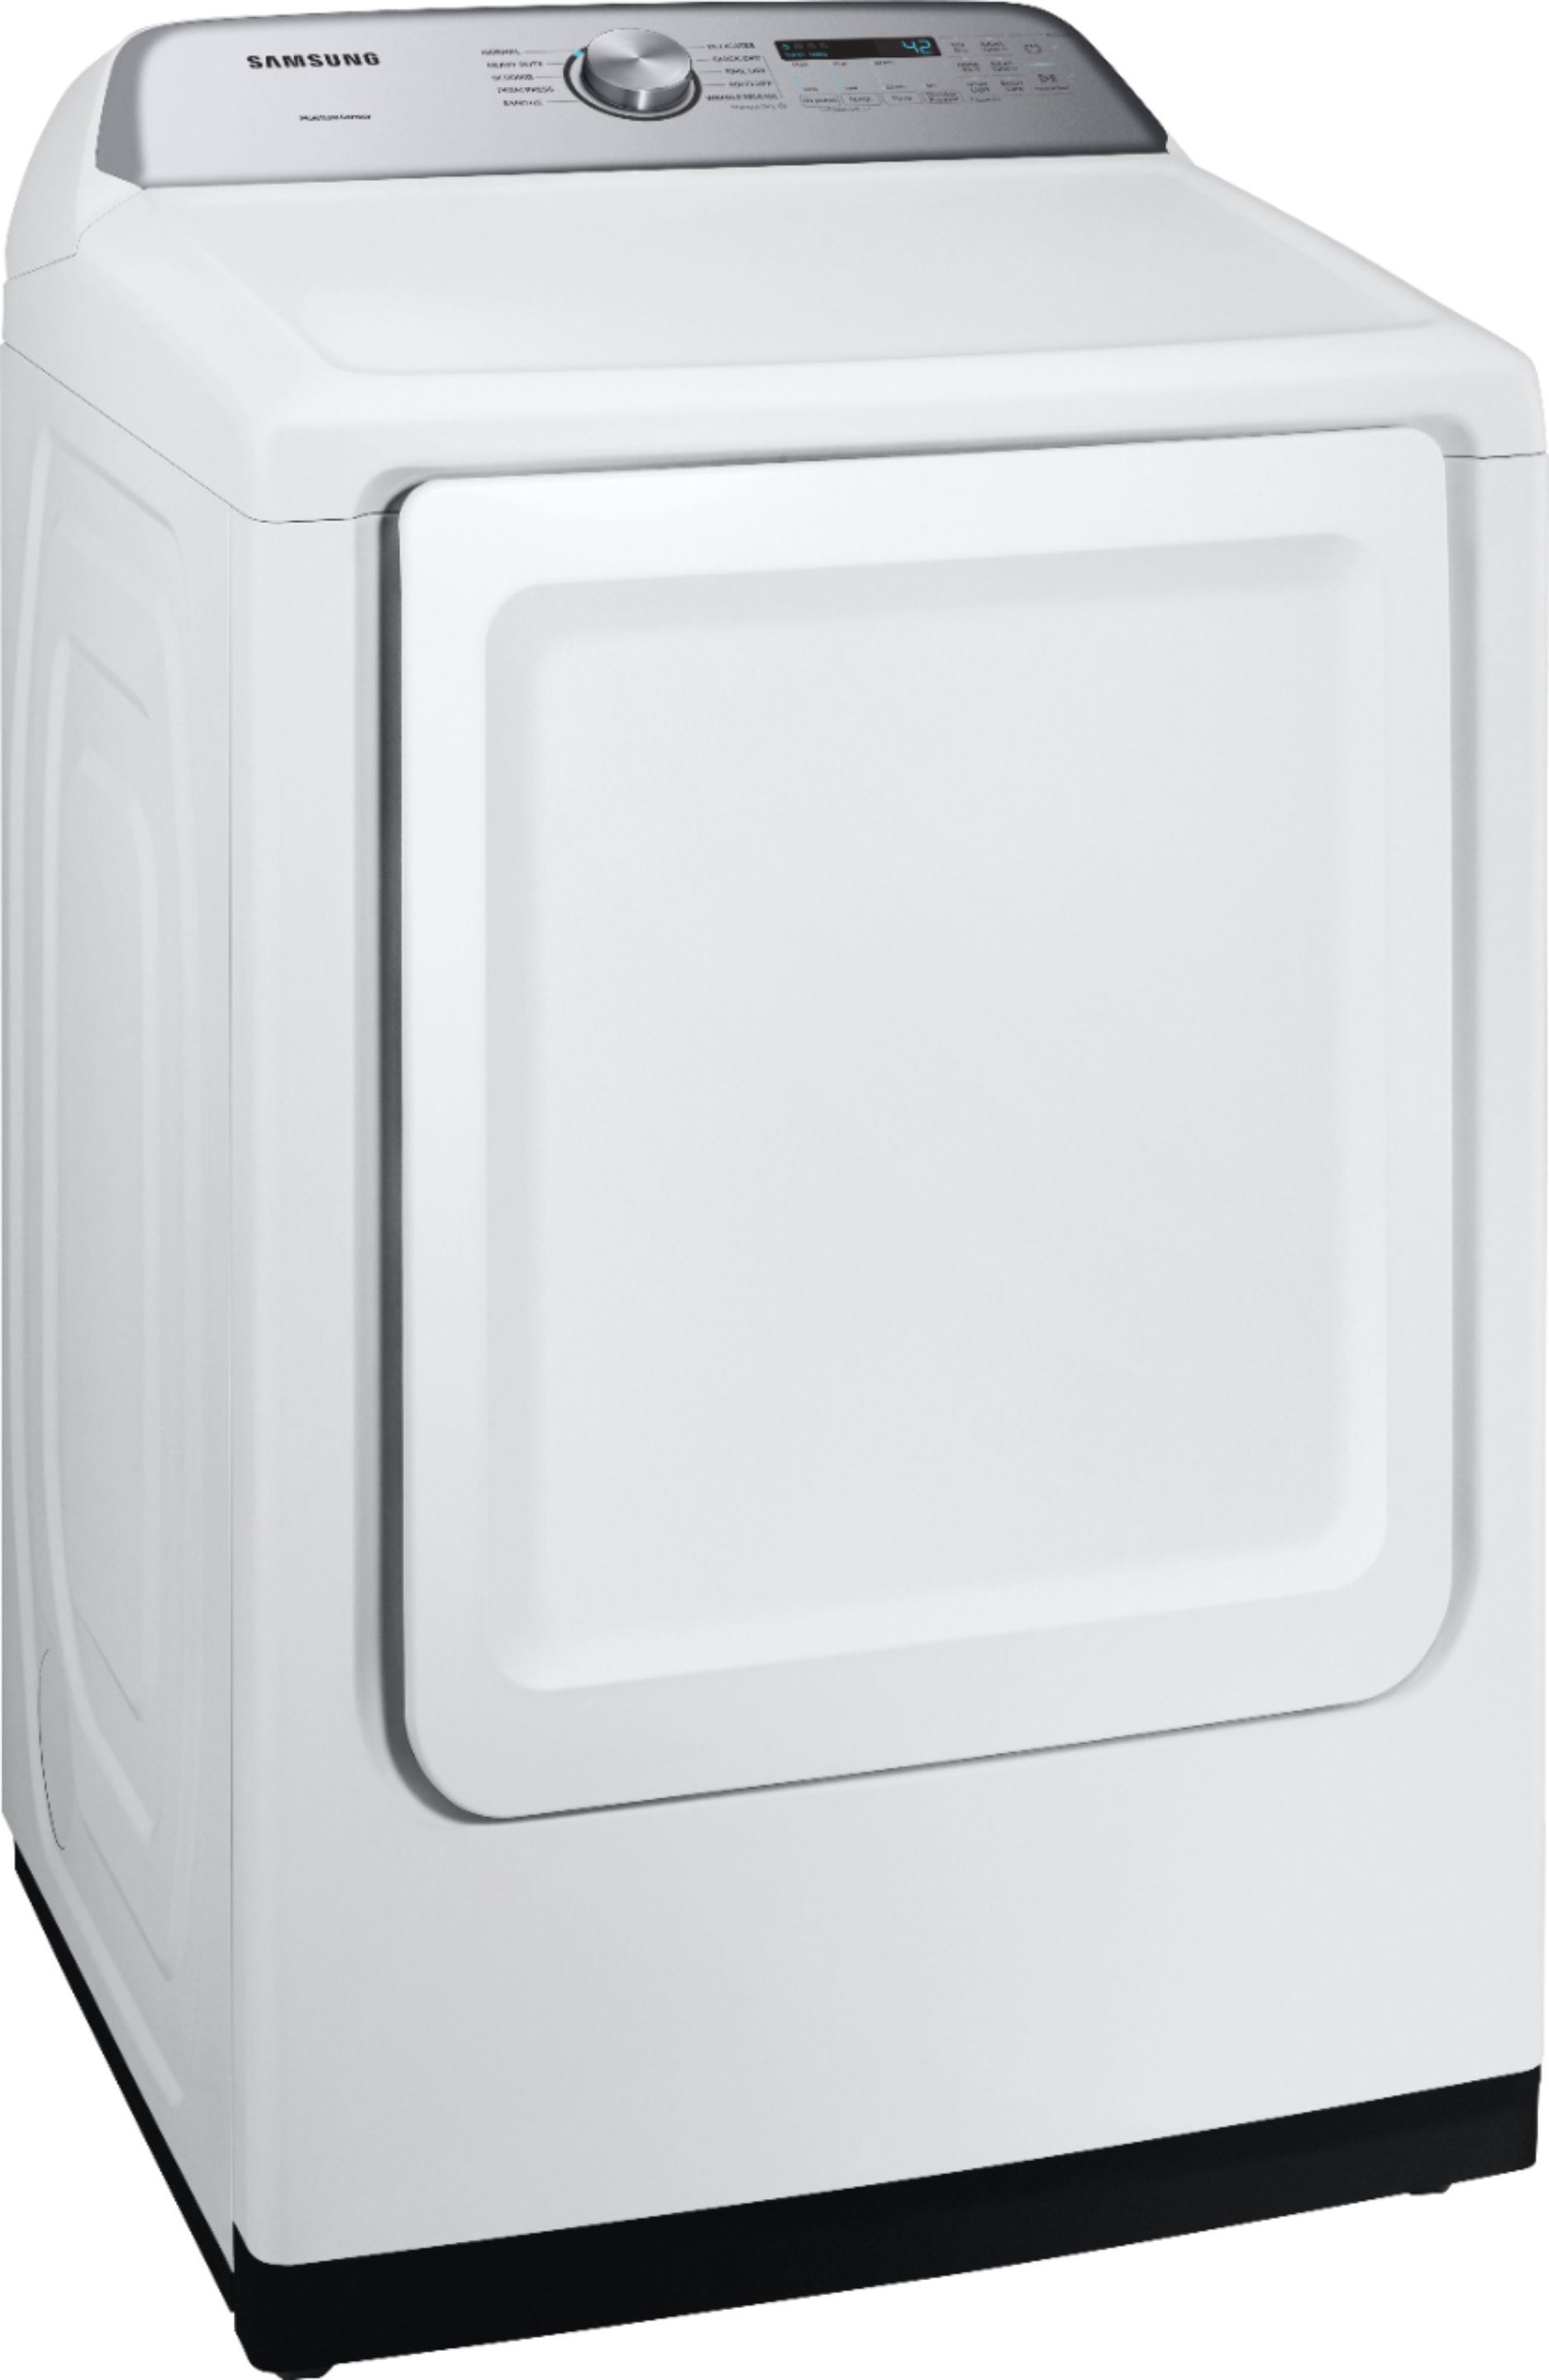 Angle View: Samsung - 7.5 Cu. Ft. Stackable Electric Dryer with Long Vent Drying - White